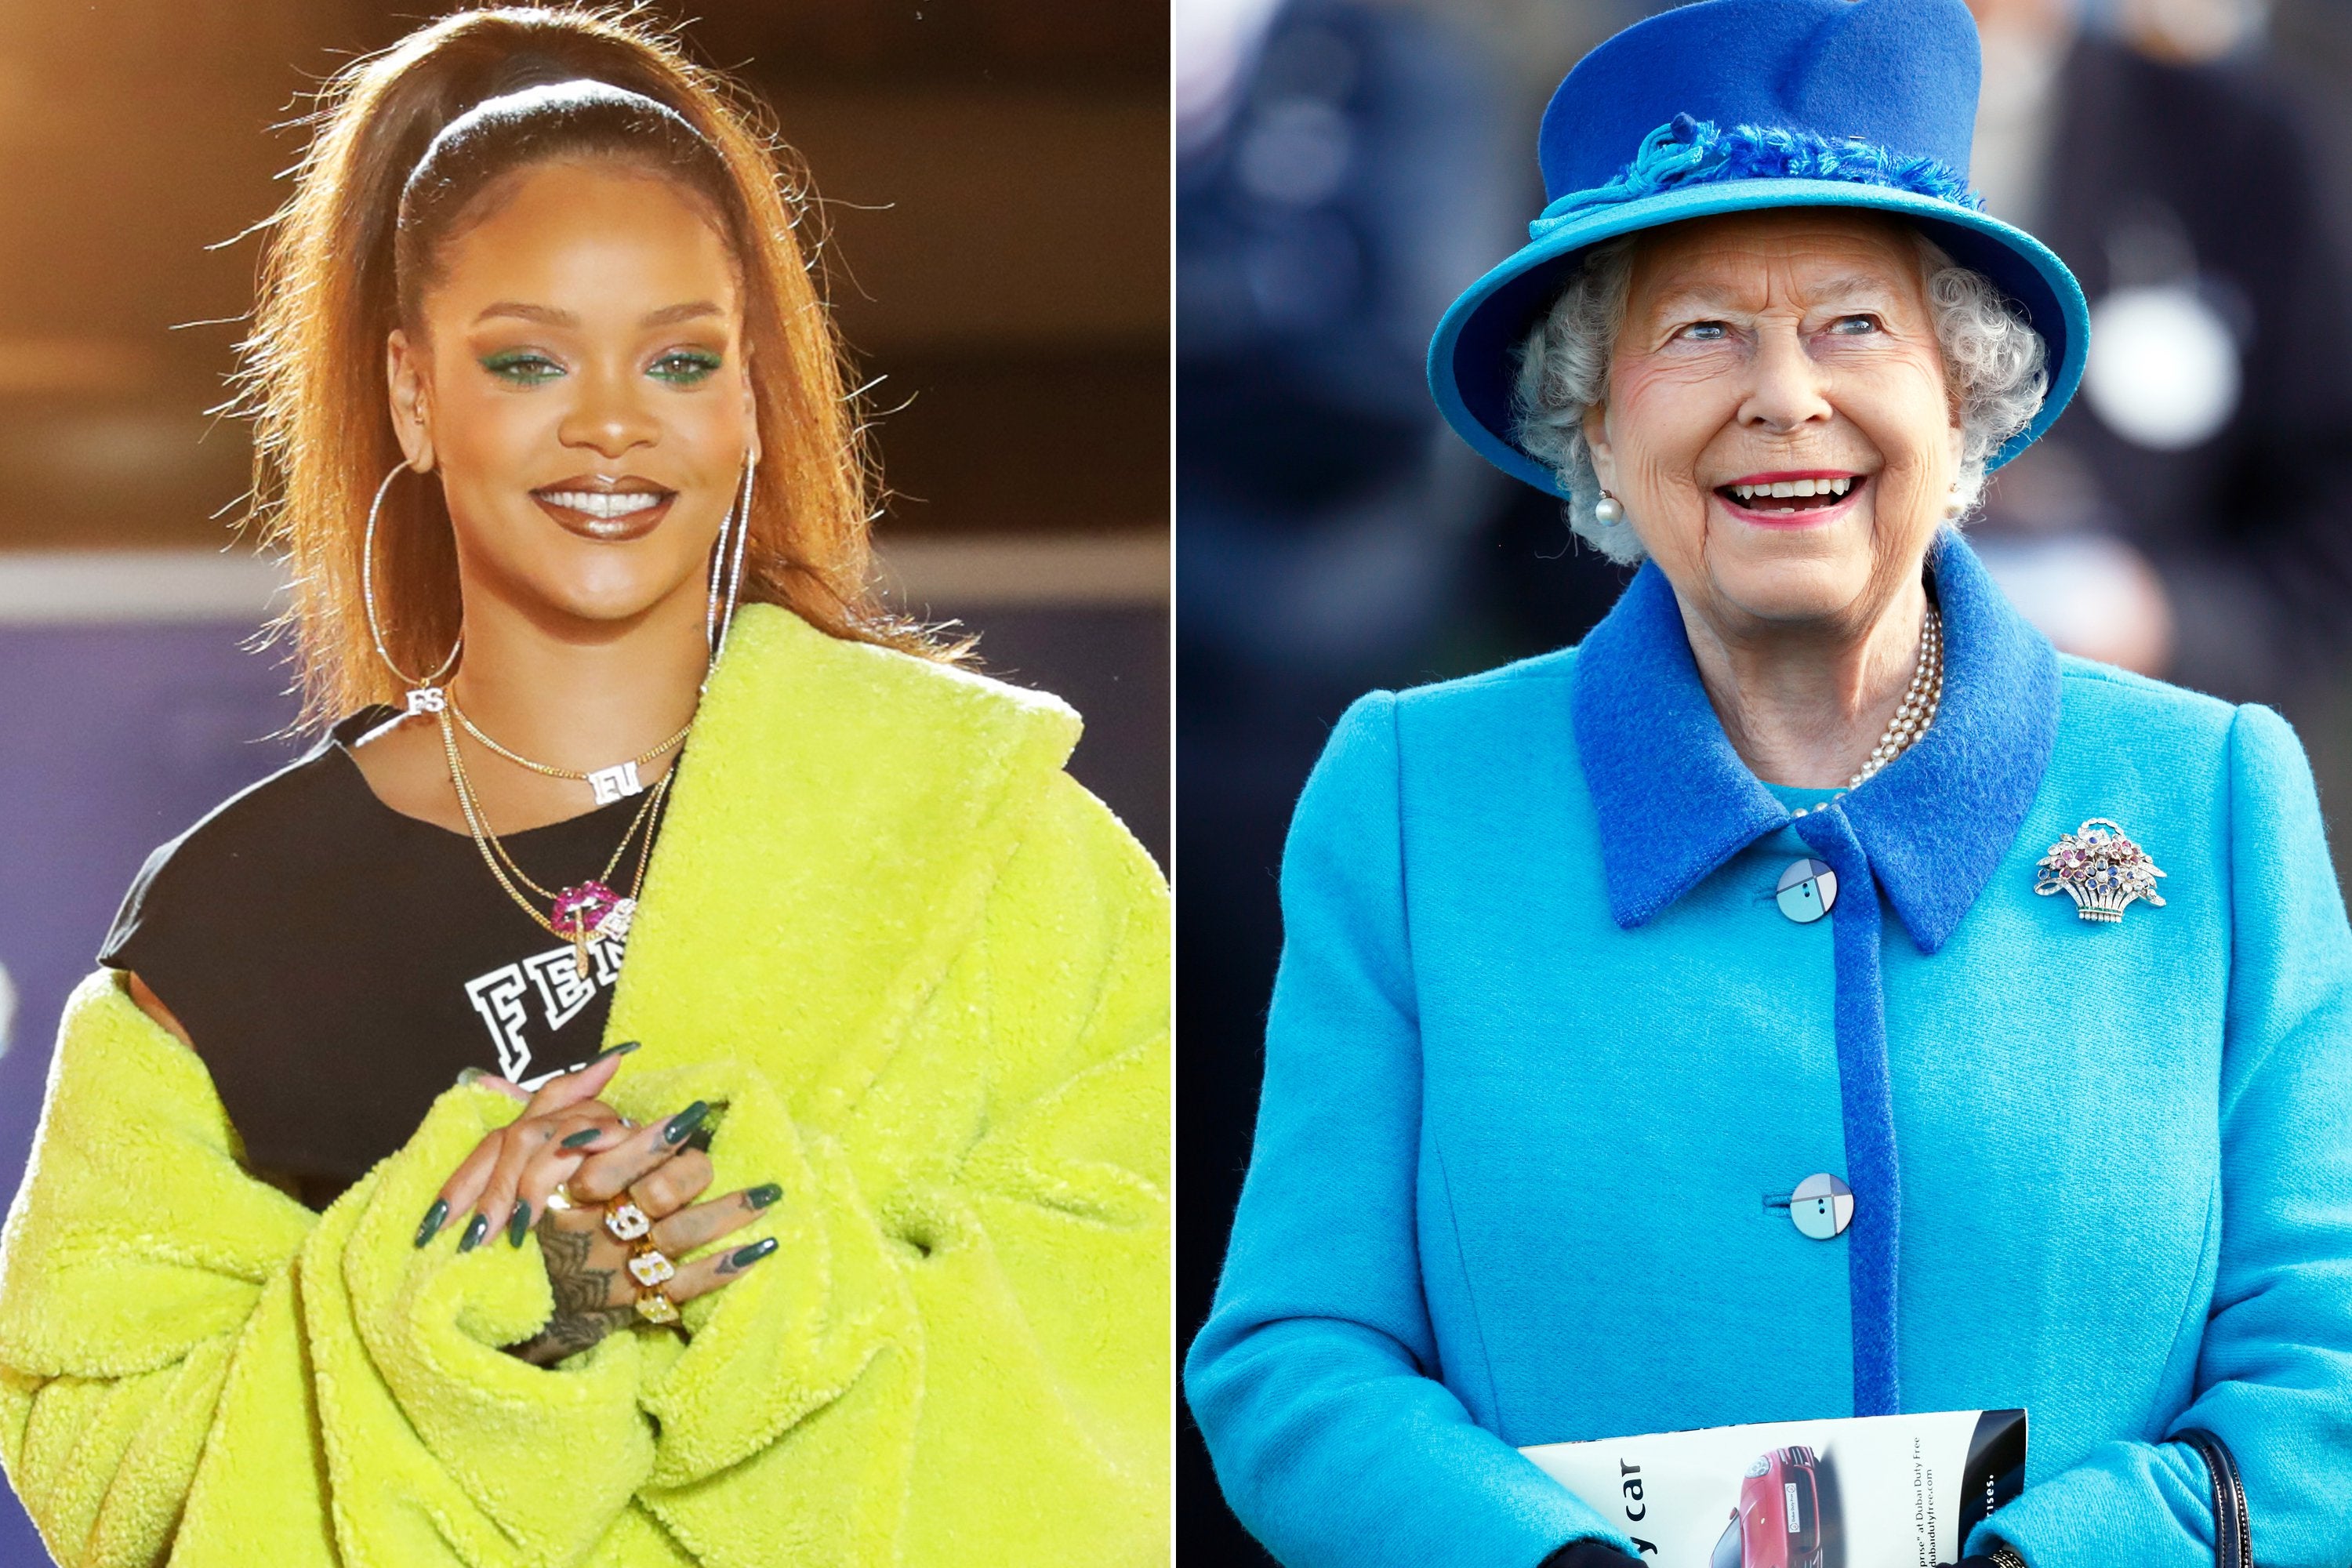 Rihanna Is Photoshopping Queen Elizabeth's Head Onto Her Body And The Internet Doesn't Know What To Think
